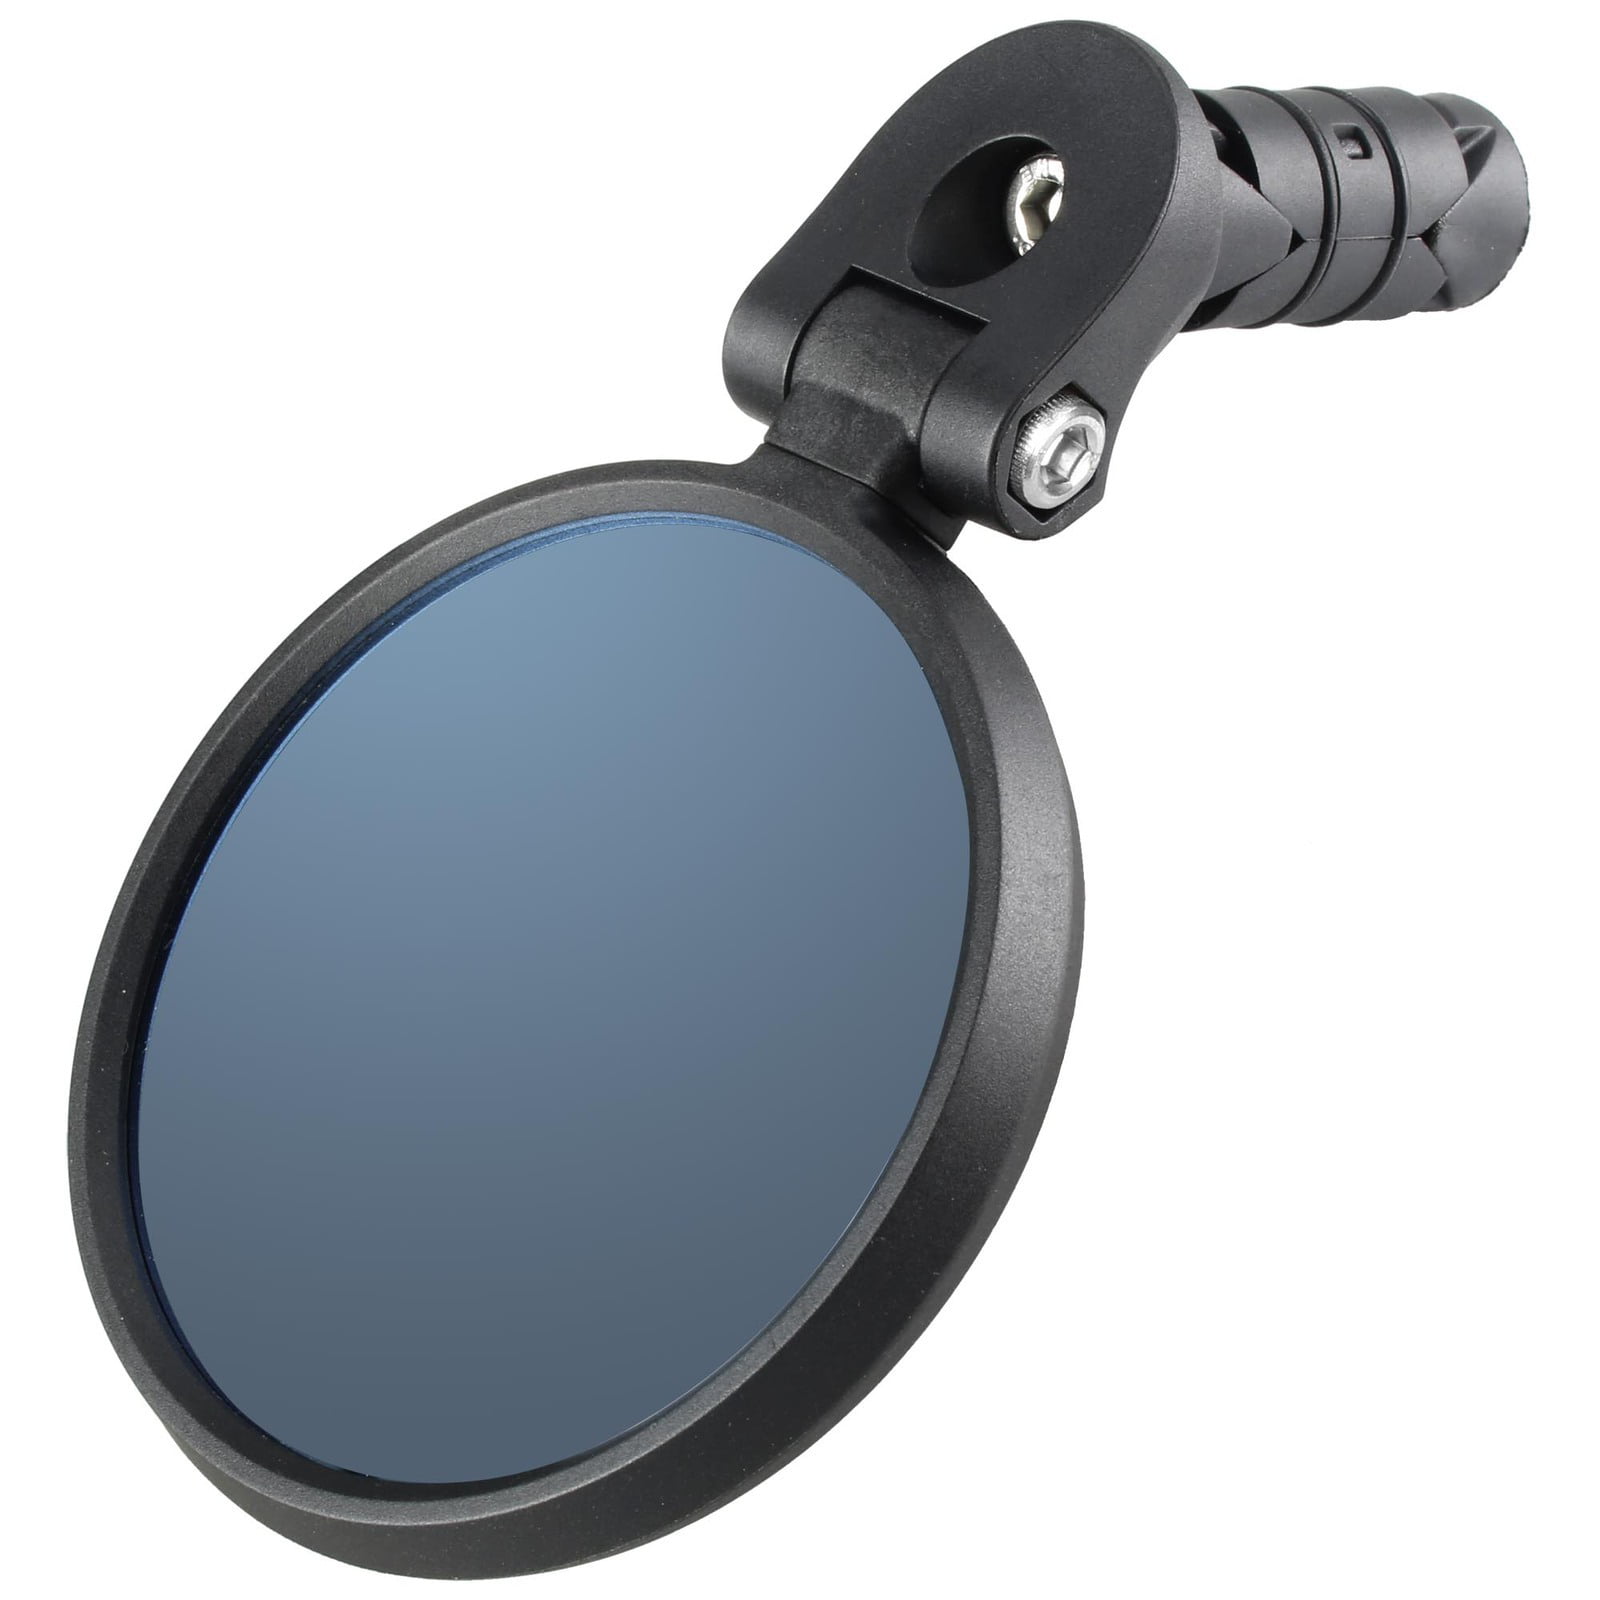 Left, Right or Pair Venzo Bicycle Bike Accessories Handlebar End Mount Mirror Blue Lens 75%/Silver Lens 50% Anti-Glare Glass Great for Road or Mountain Rear View 